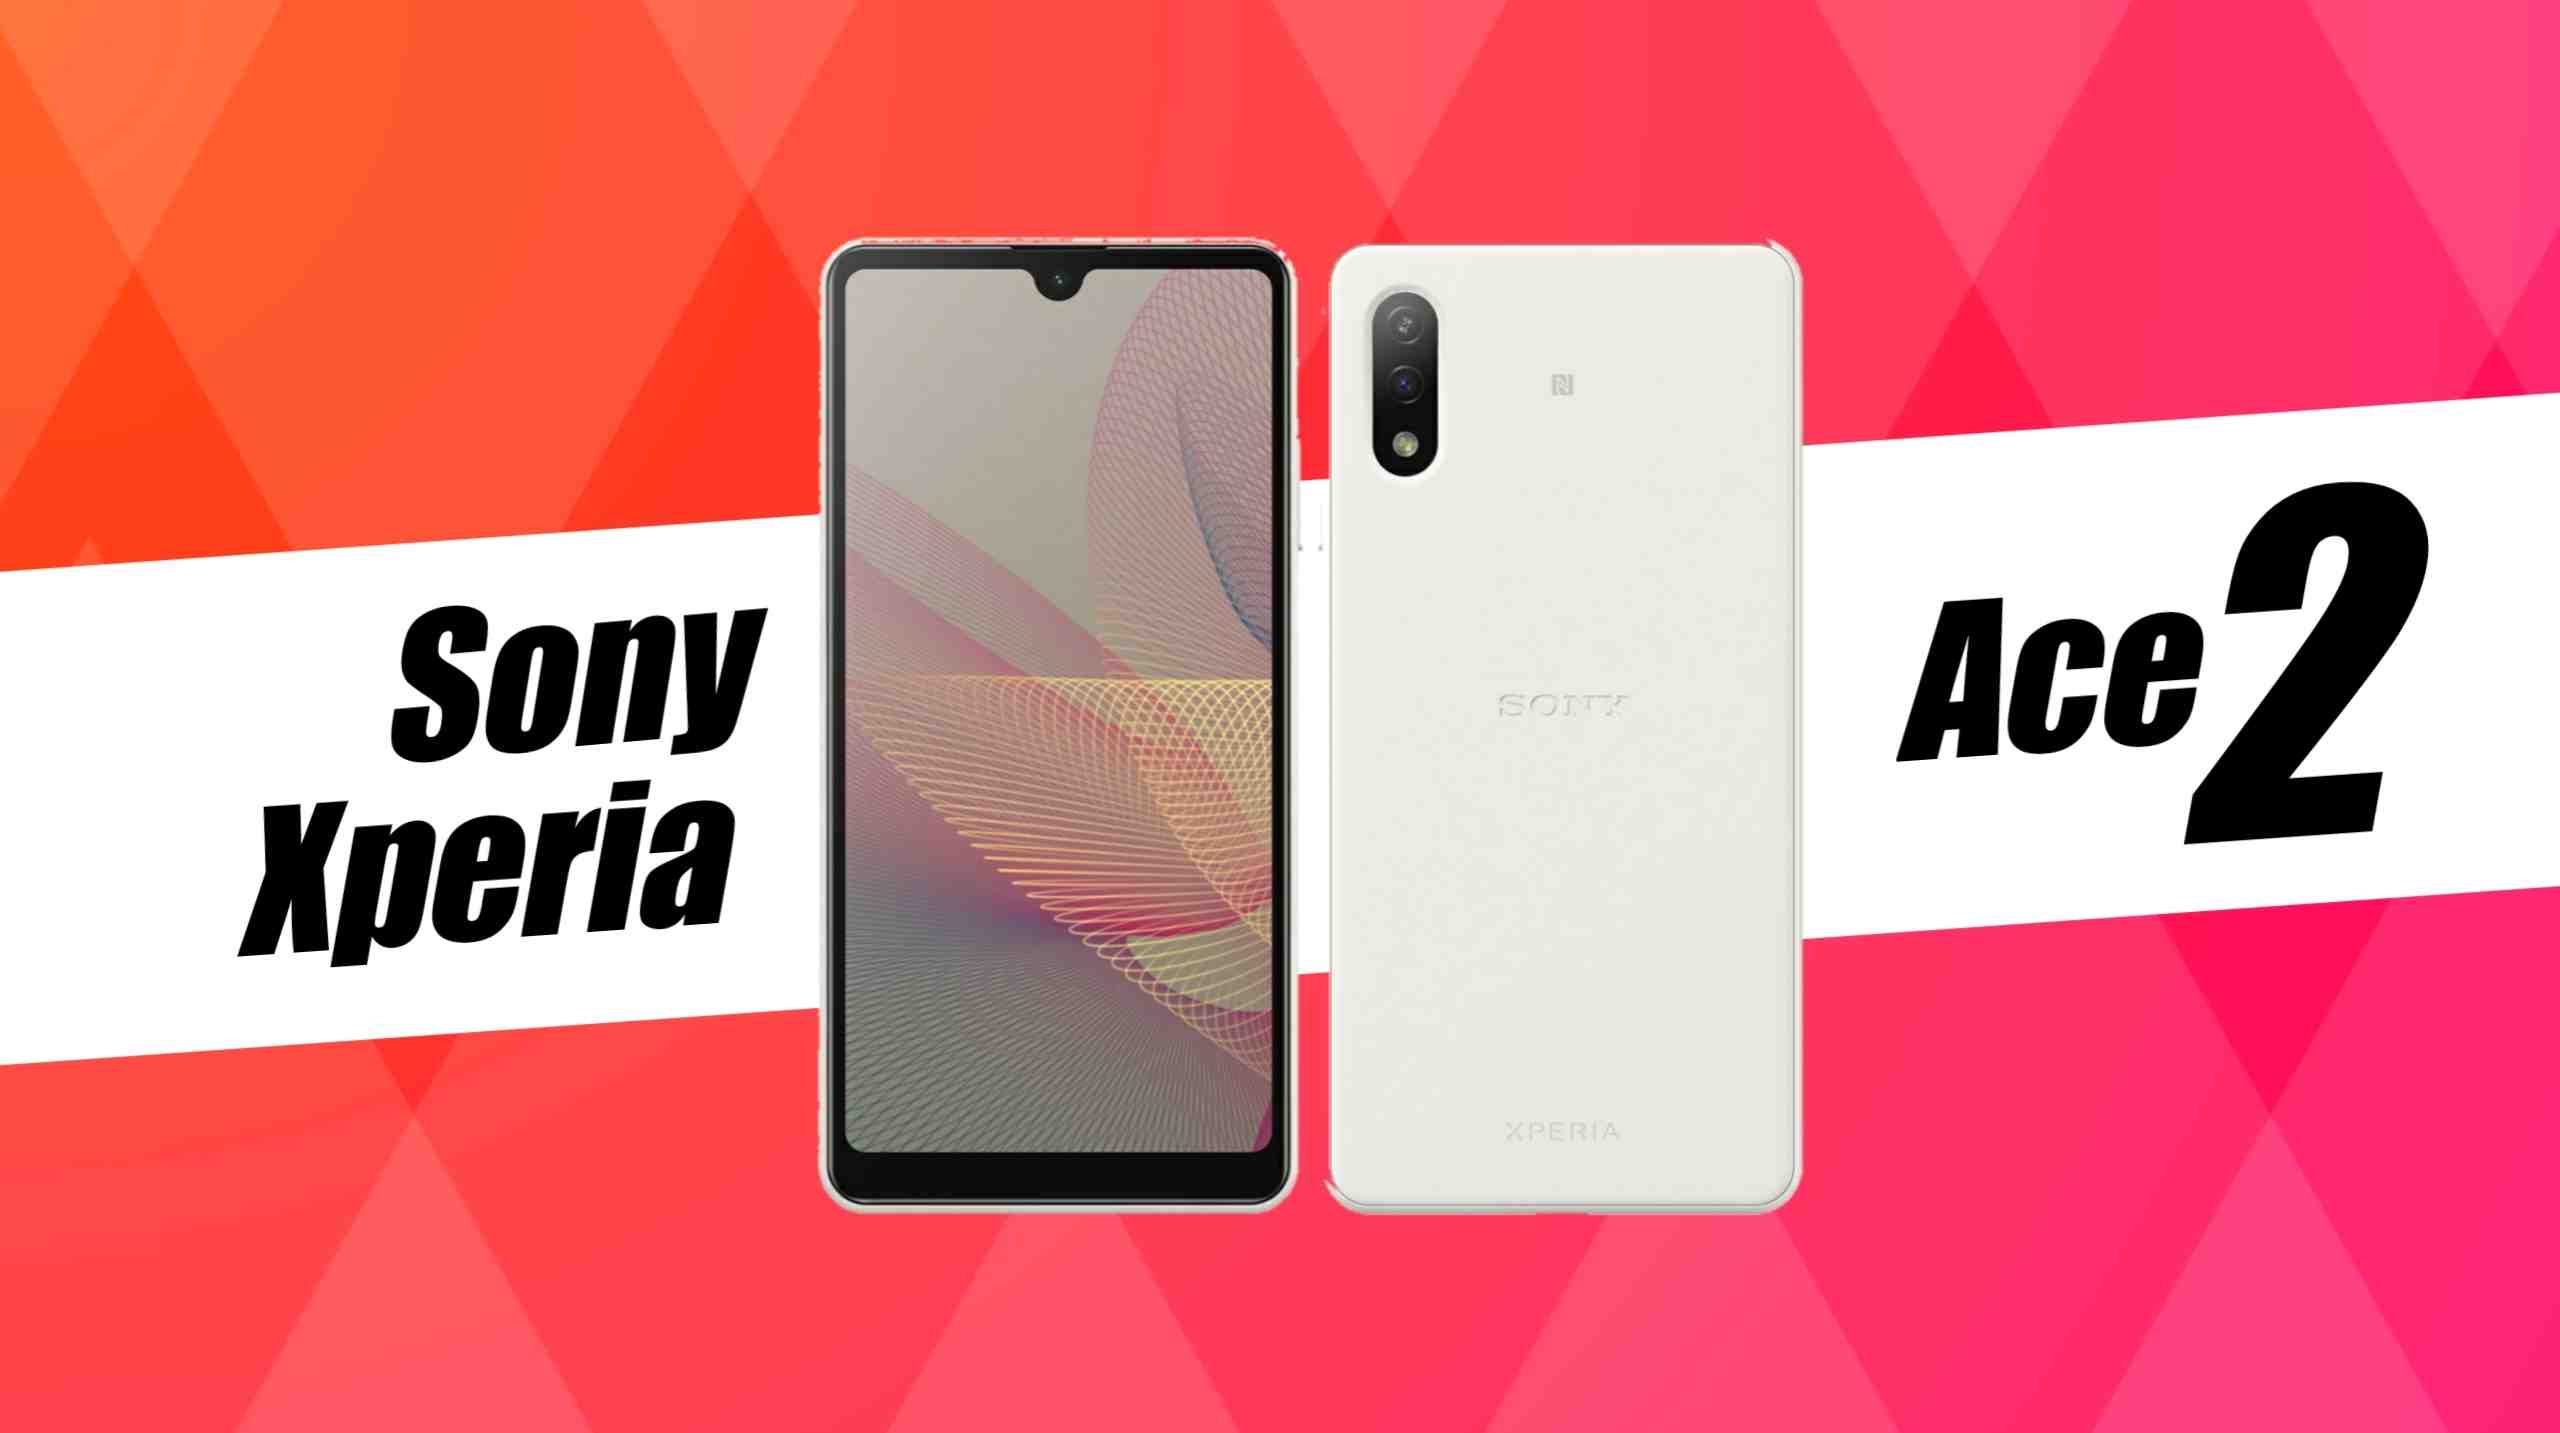 Sony Xperia Ace 2 announced with MediaTek Helio P35 SoC 13-Megapixel dual camera setup and 4,500mAh Battery: Specs, Price